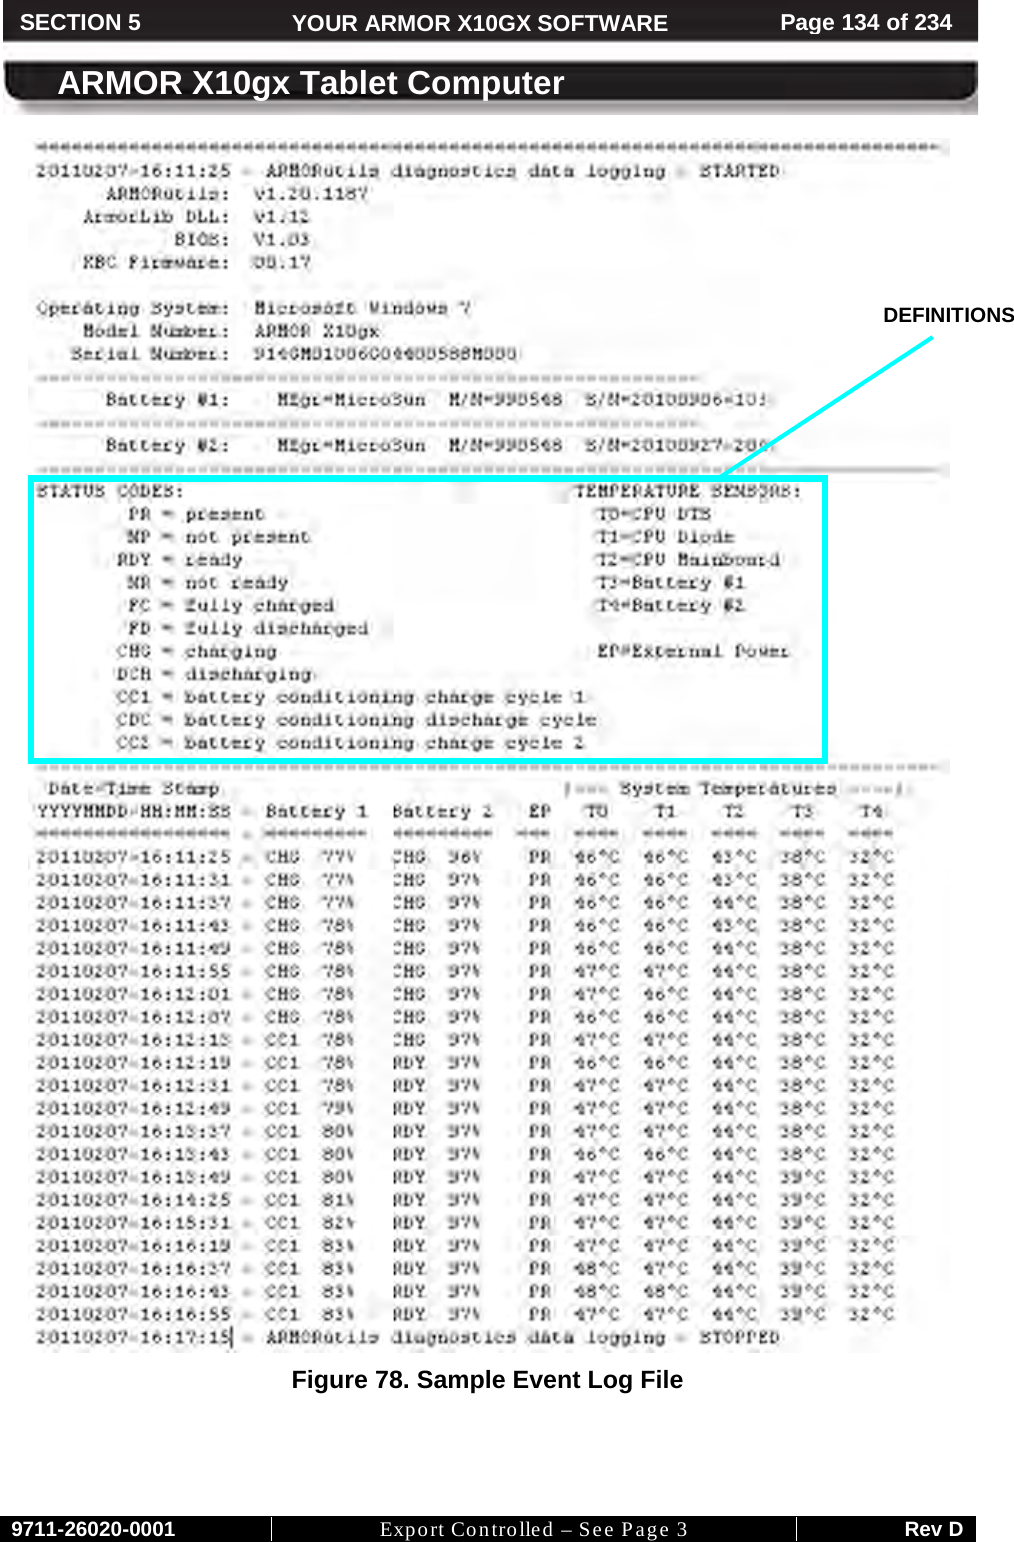     9711-26020-0001 Export Controlled – See Page 3 Rev D SECTION 5 YOUR ARMOR X10GX SOFTWARE Page 134 of 234  ARMOR X10gx Tablet Computer  Figure 78. Sample Event Log File   DEFINITIONS 